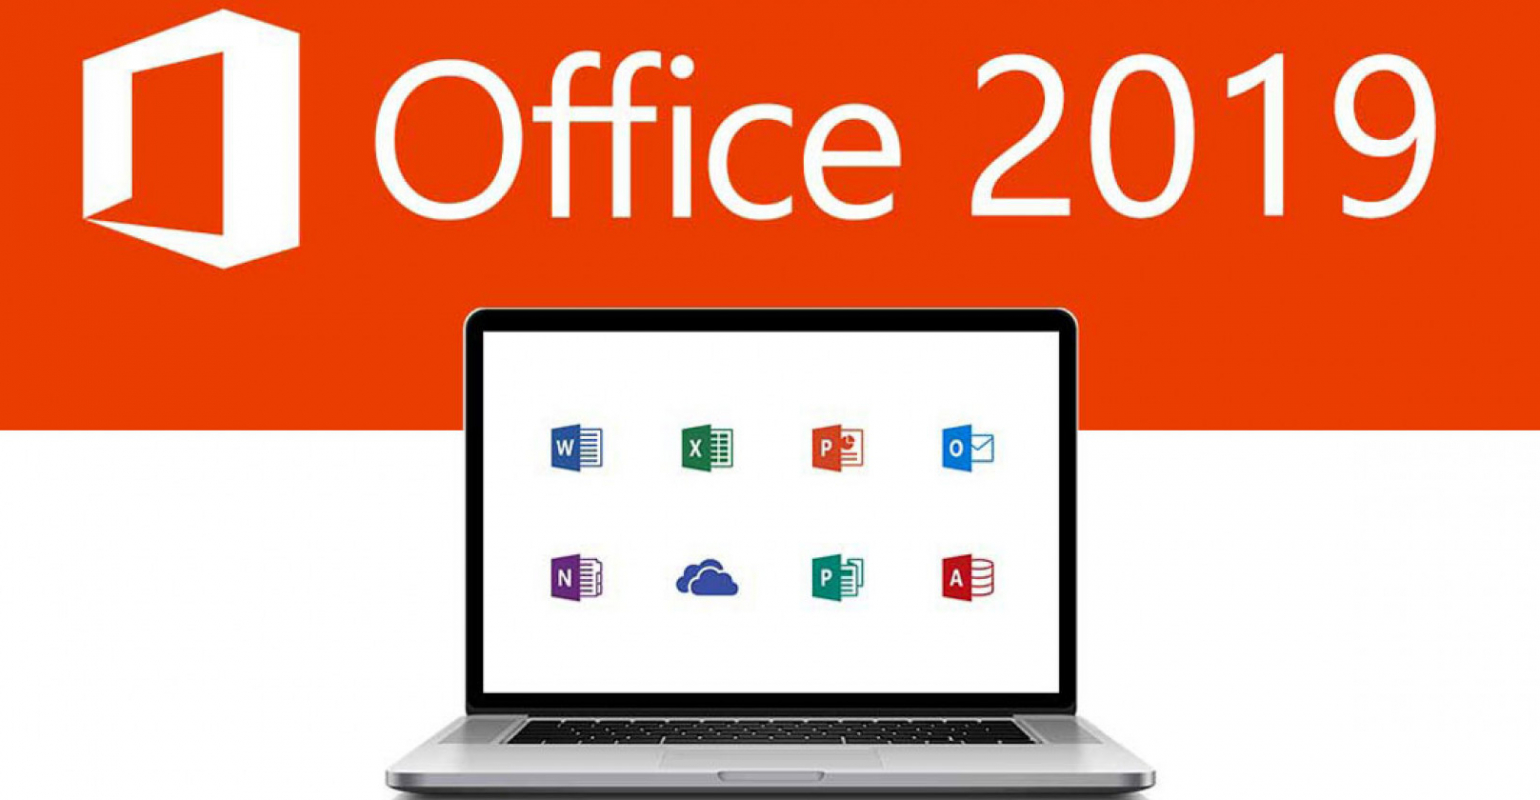 Office 2019 A Preview Lucidica It Support Blog